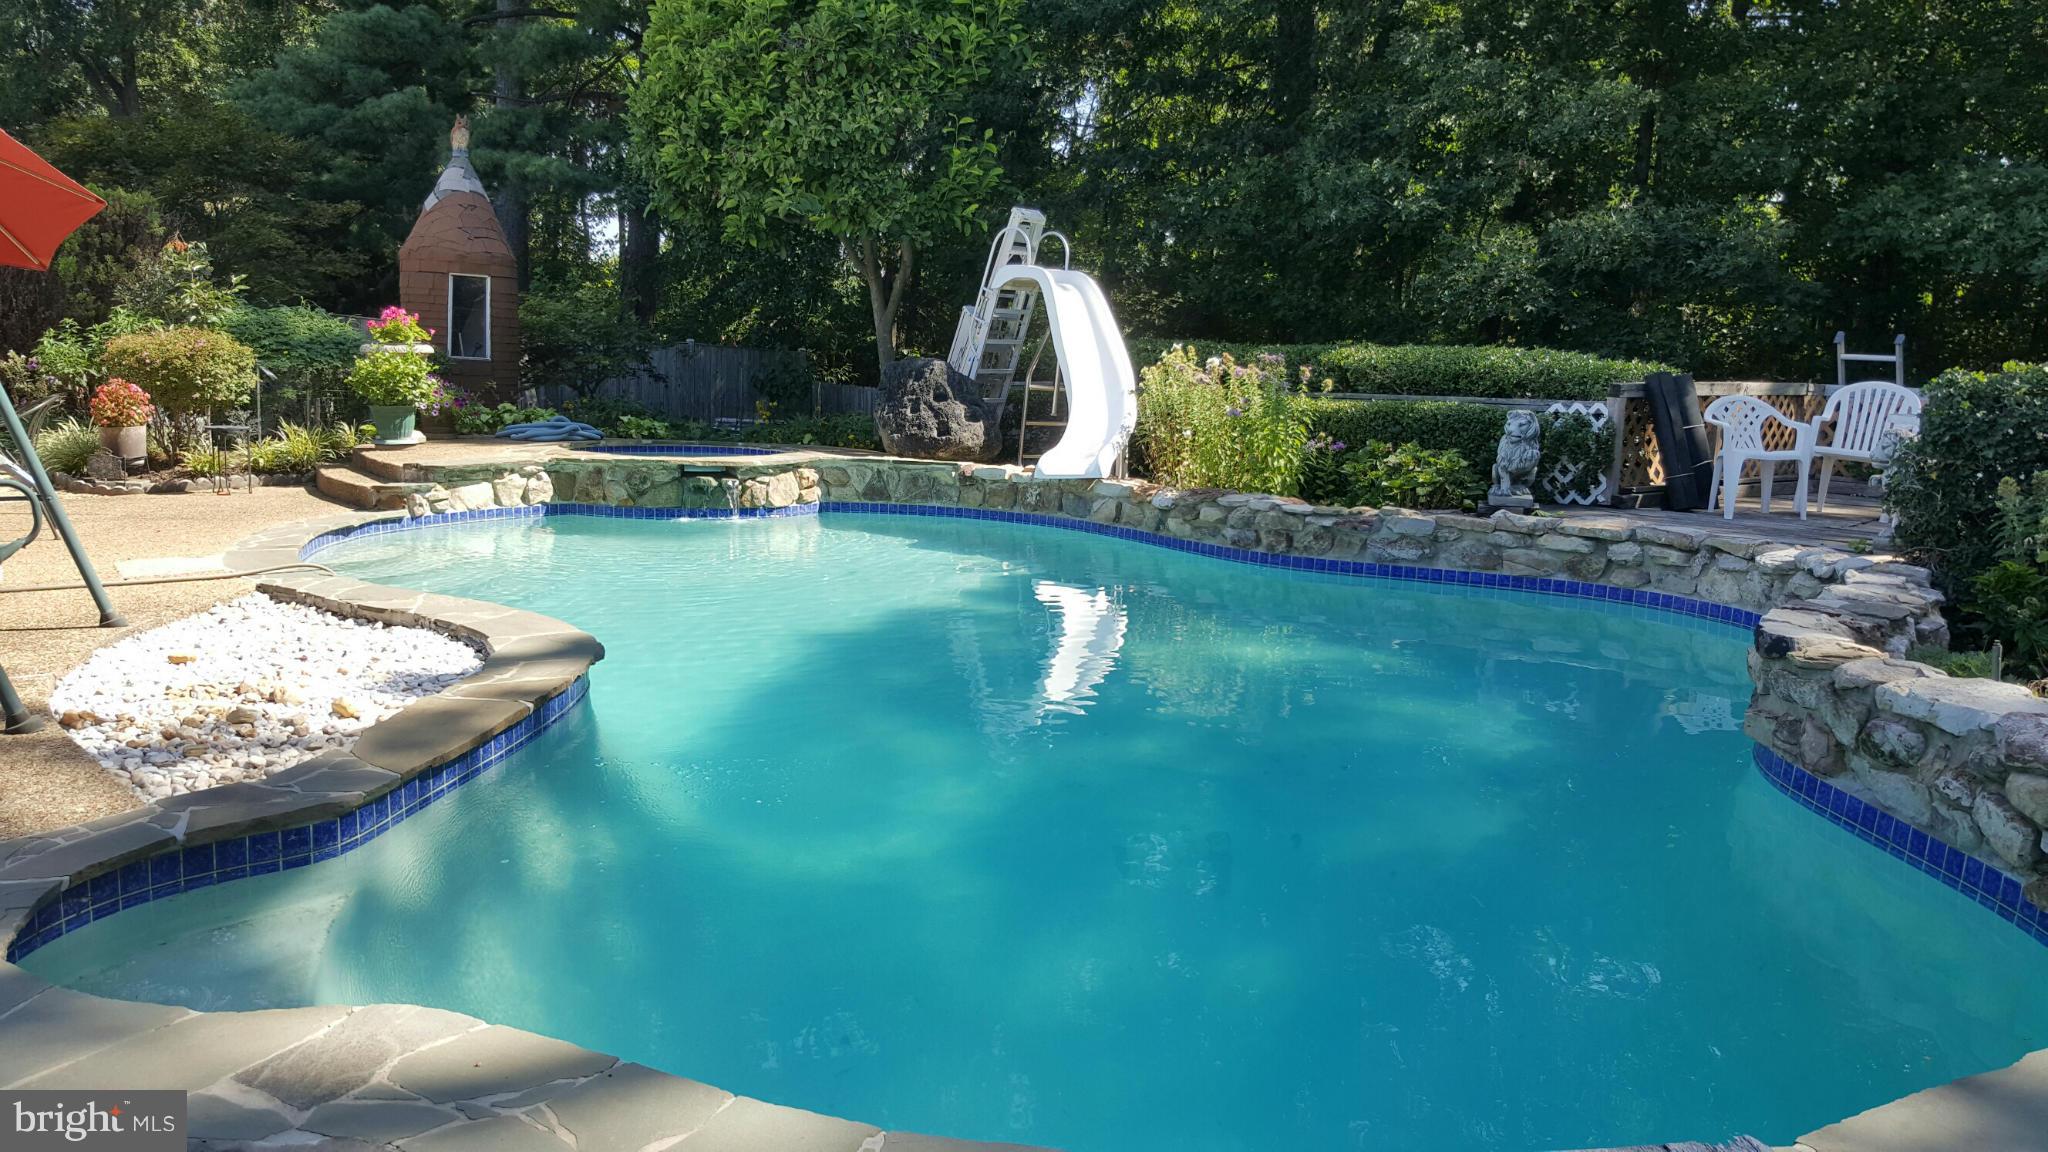 a swimming pool with barbeque oven outdoor seating and yard